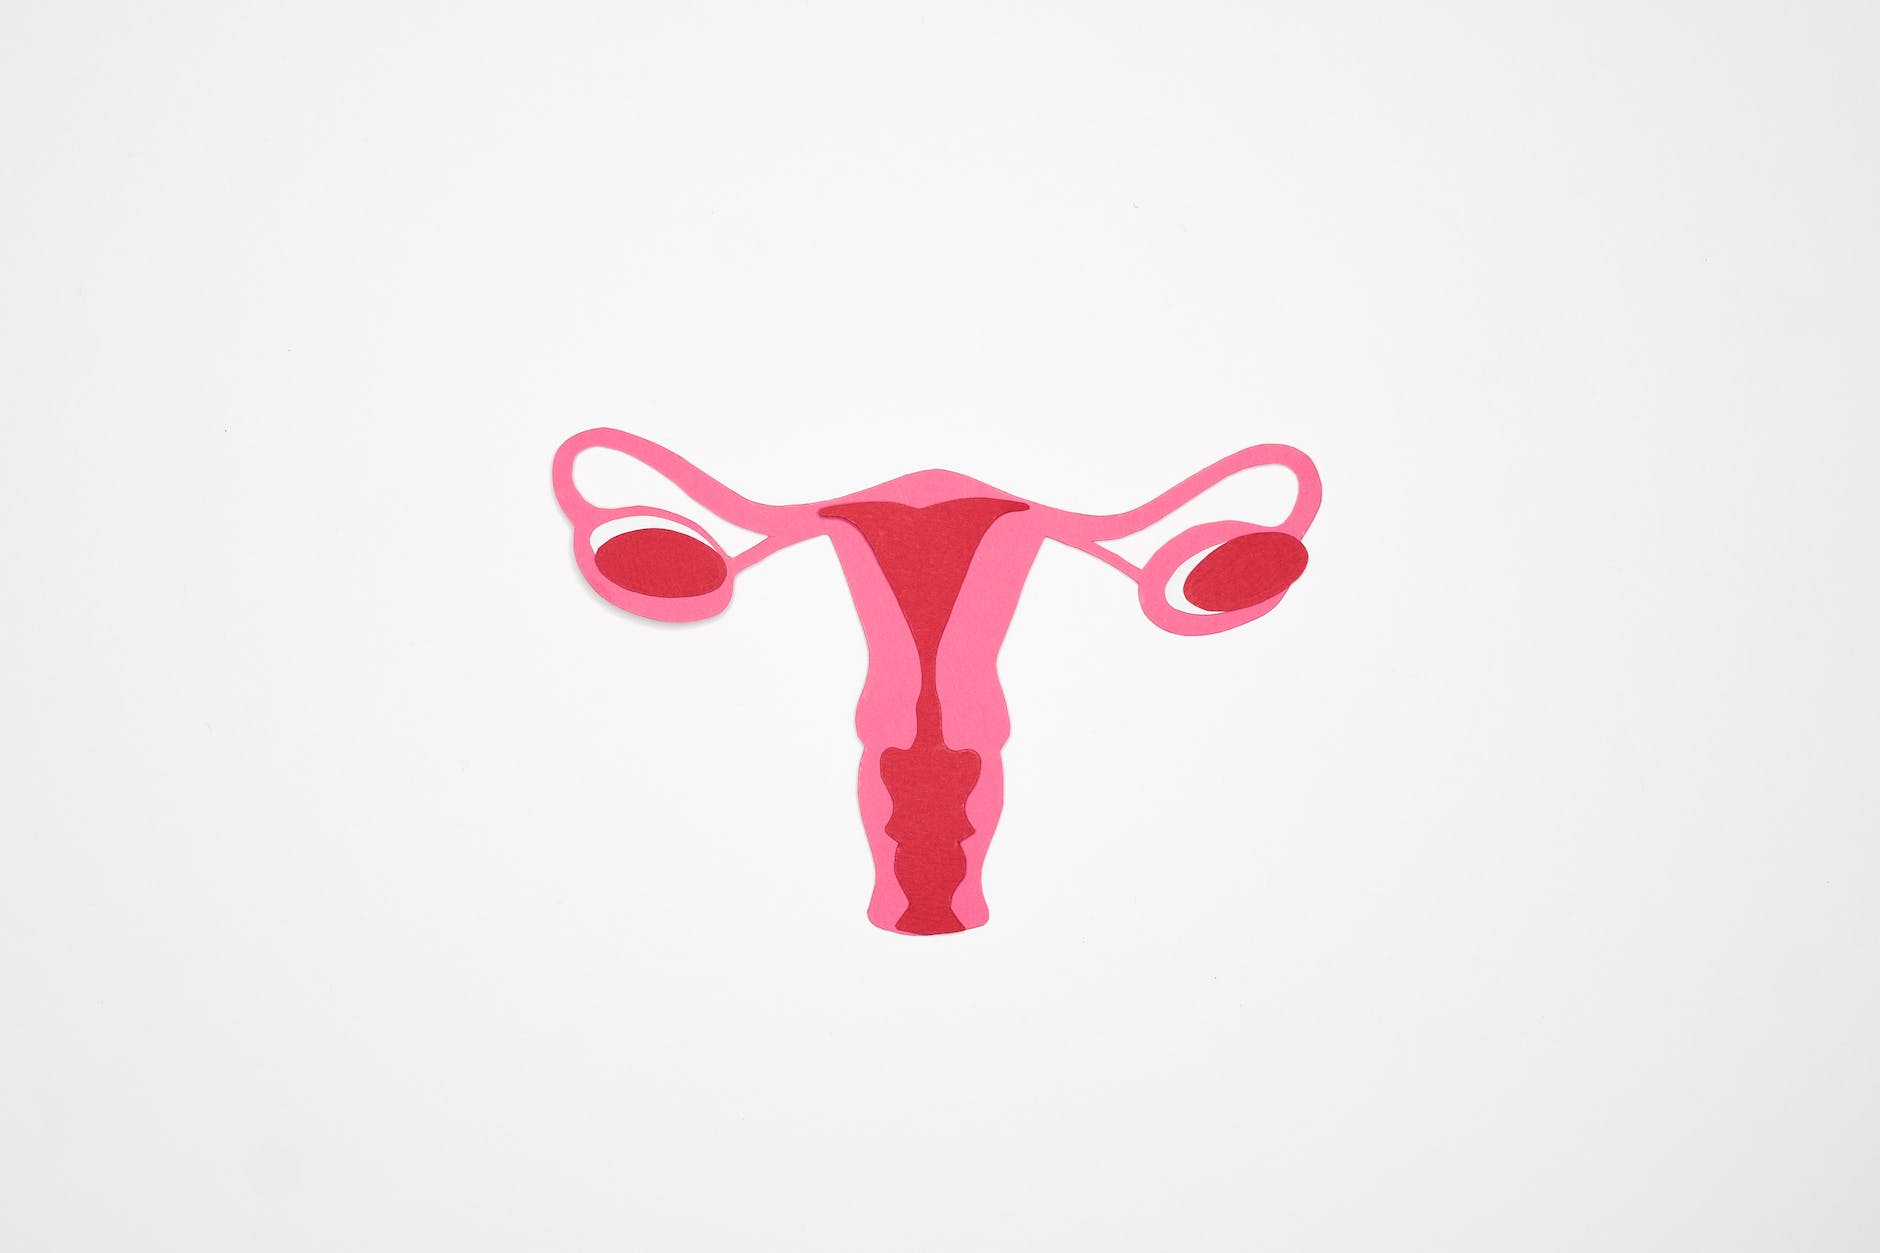 graphic art of a woman s ovary